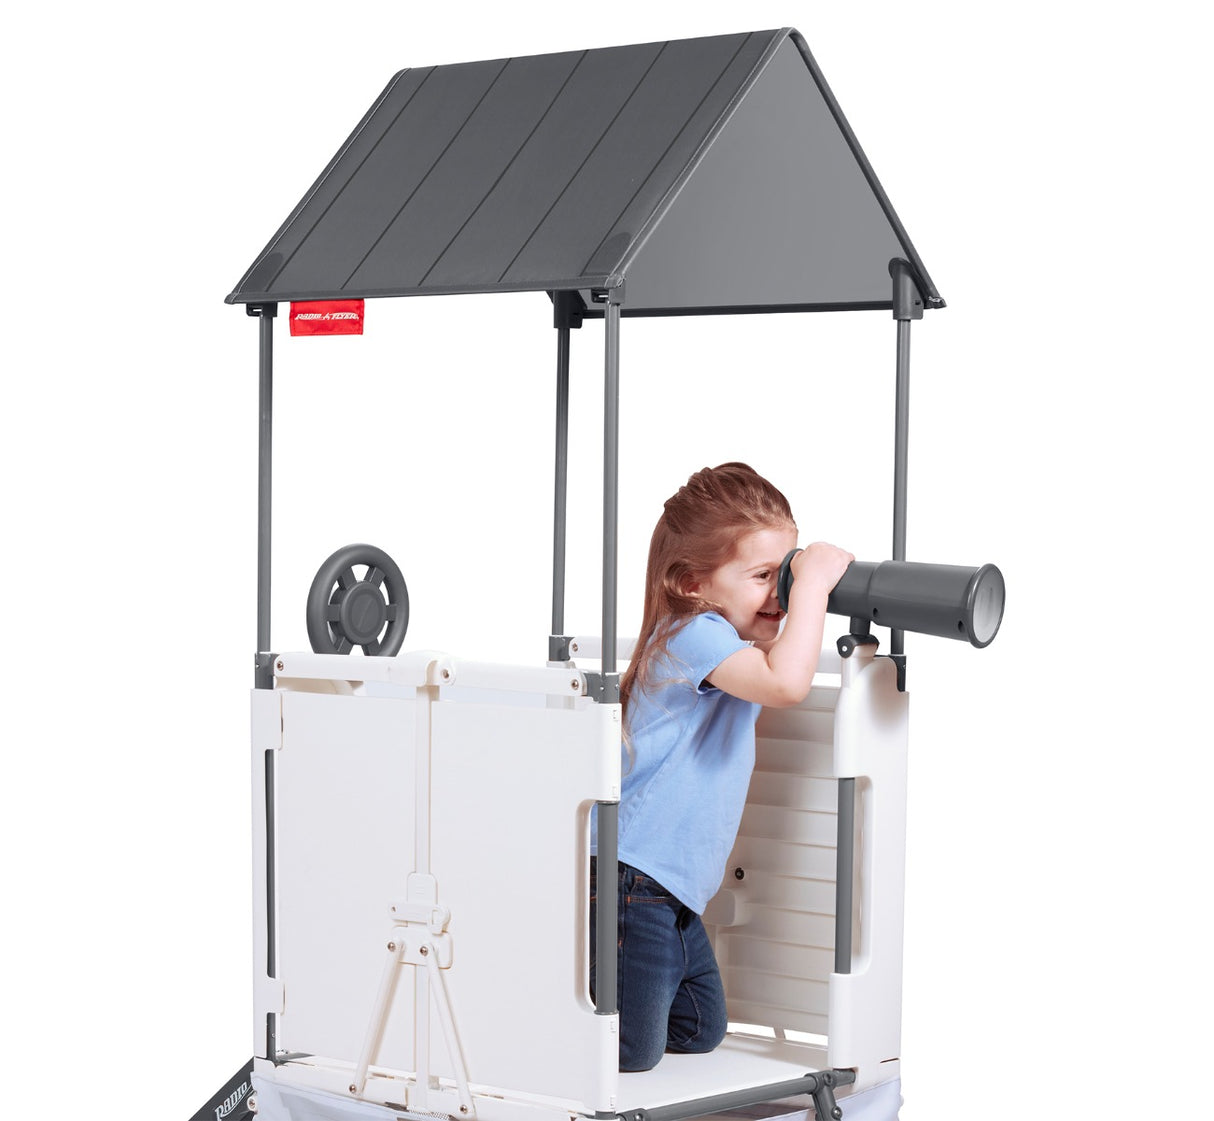 Girl looking through included telescope